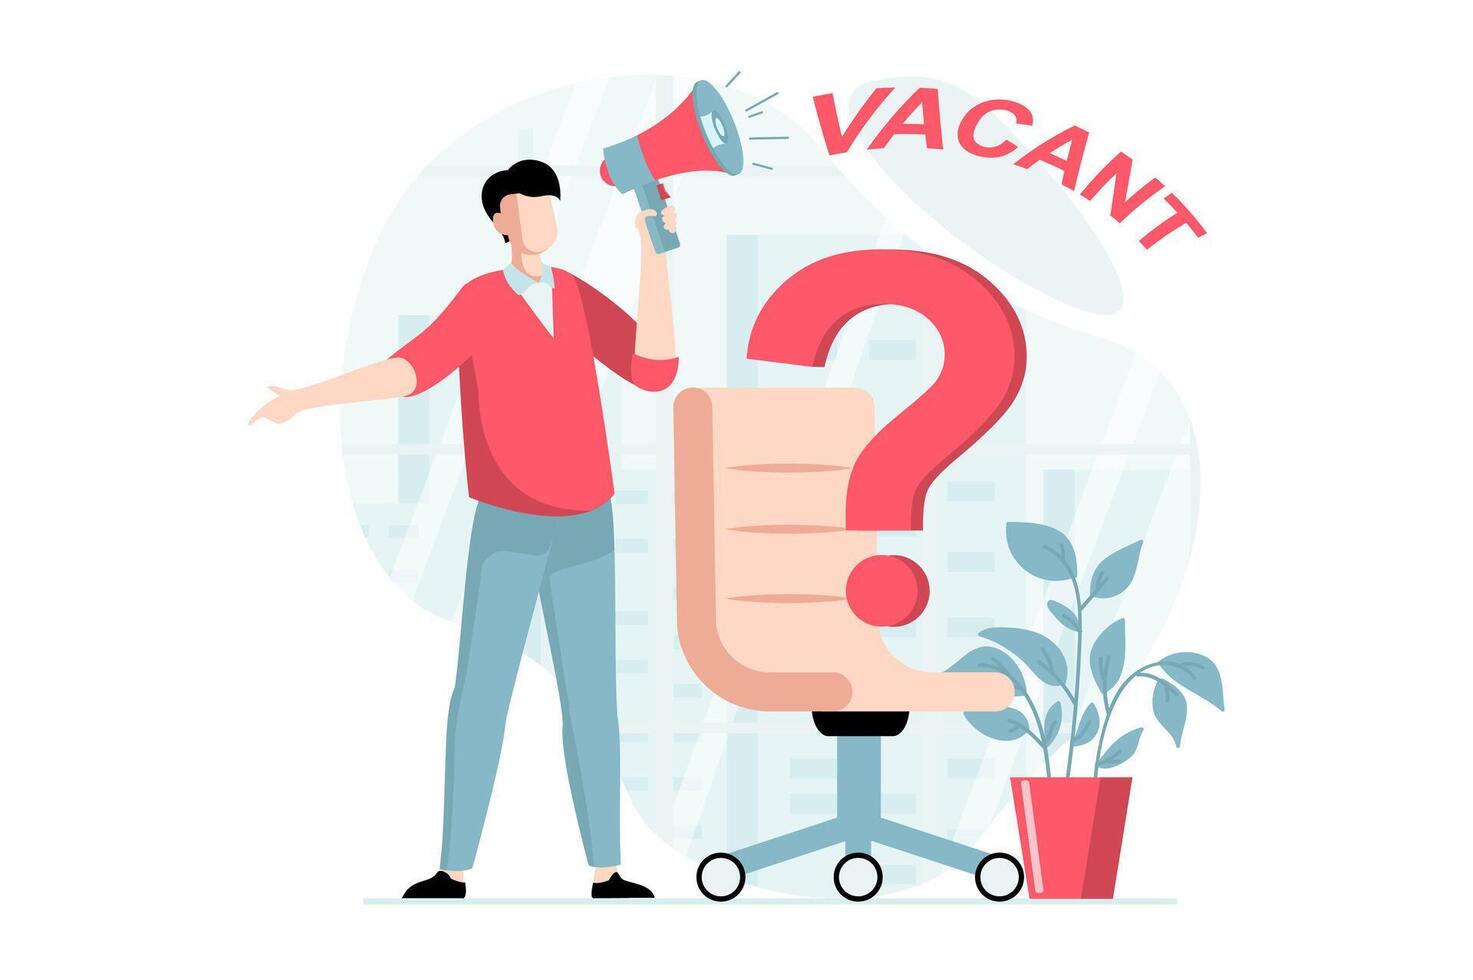 Employee hiring process concept with people scene in flat design. Man HR manager with megaphone announces opening of vacancy in new company. illustration with character situation for web vector